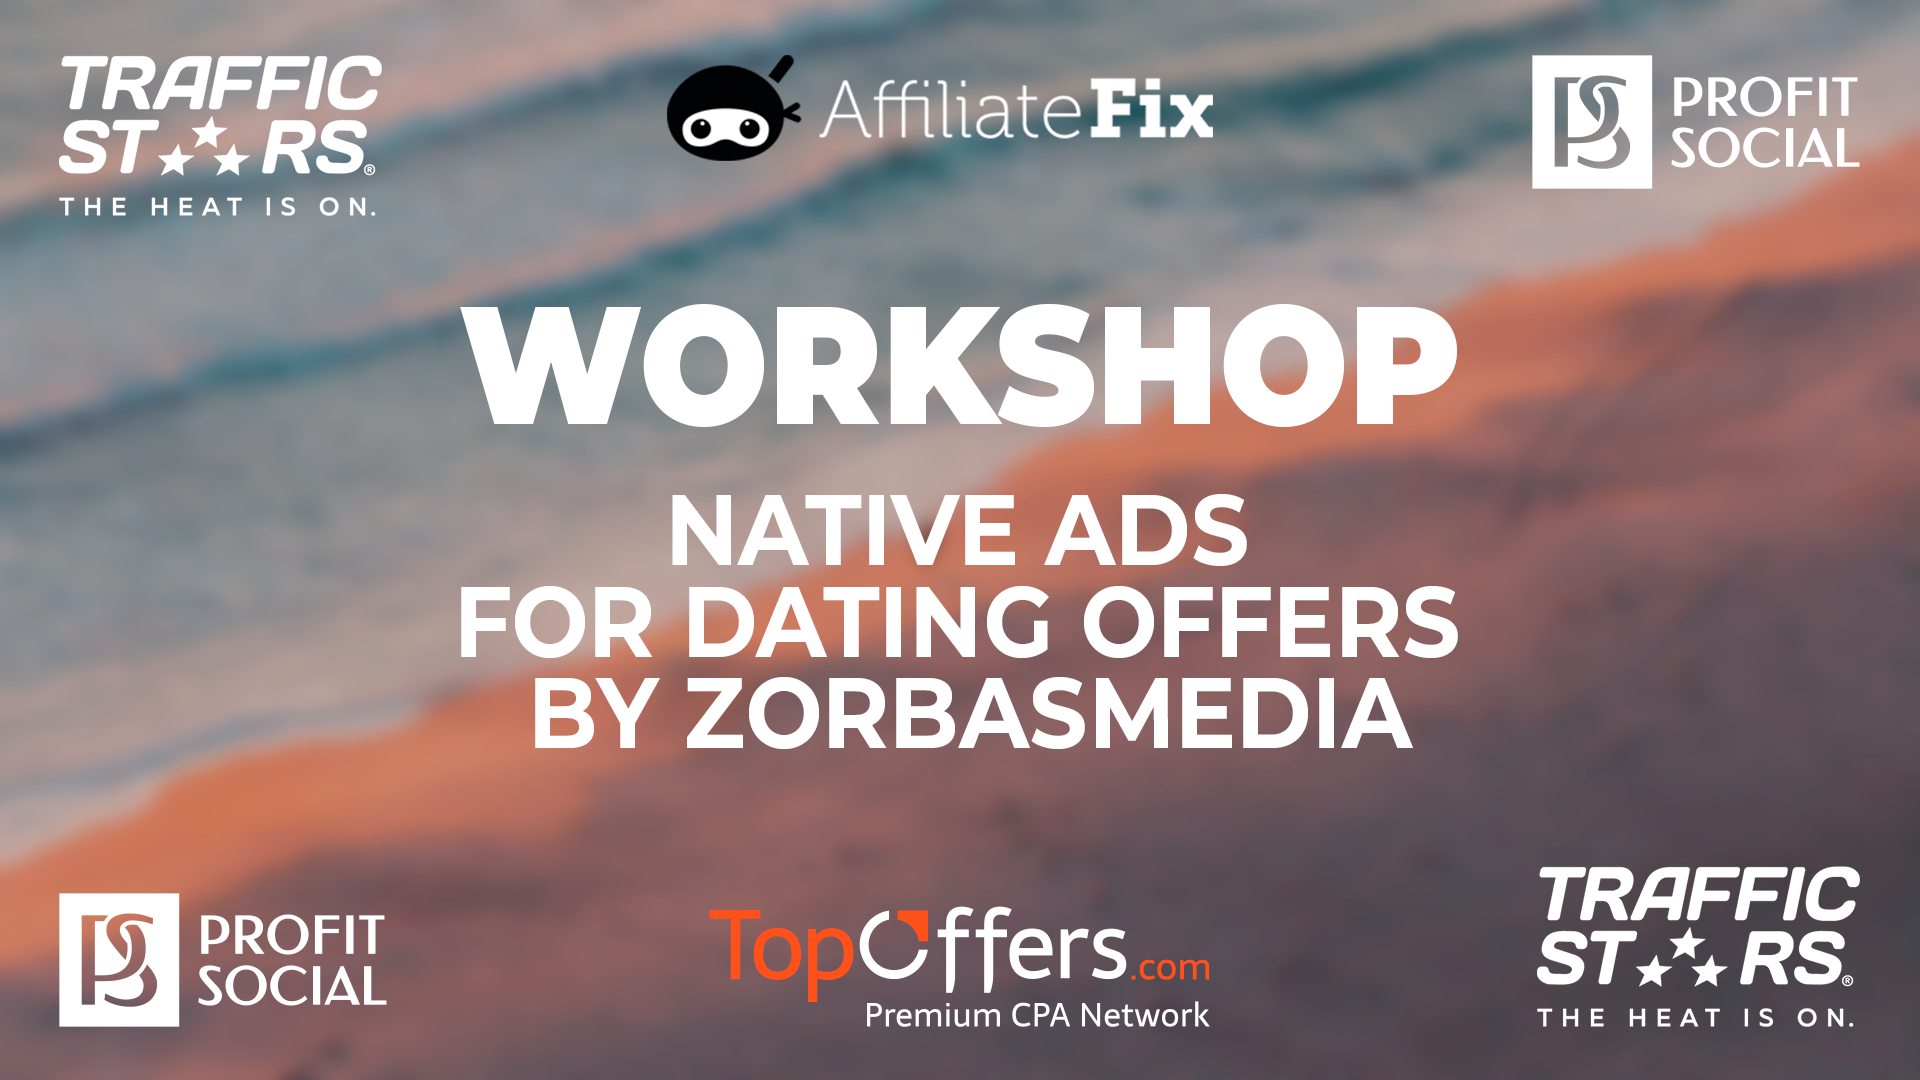 Native ads for dating offers by ZorbasMedia